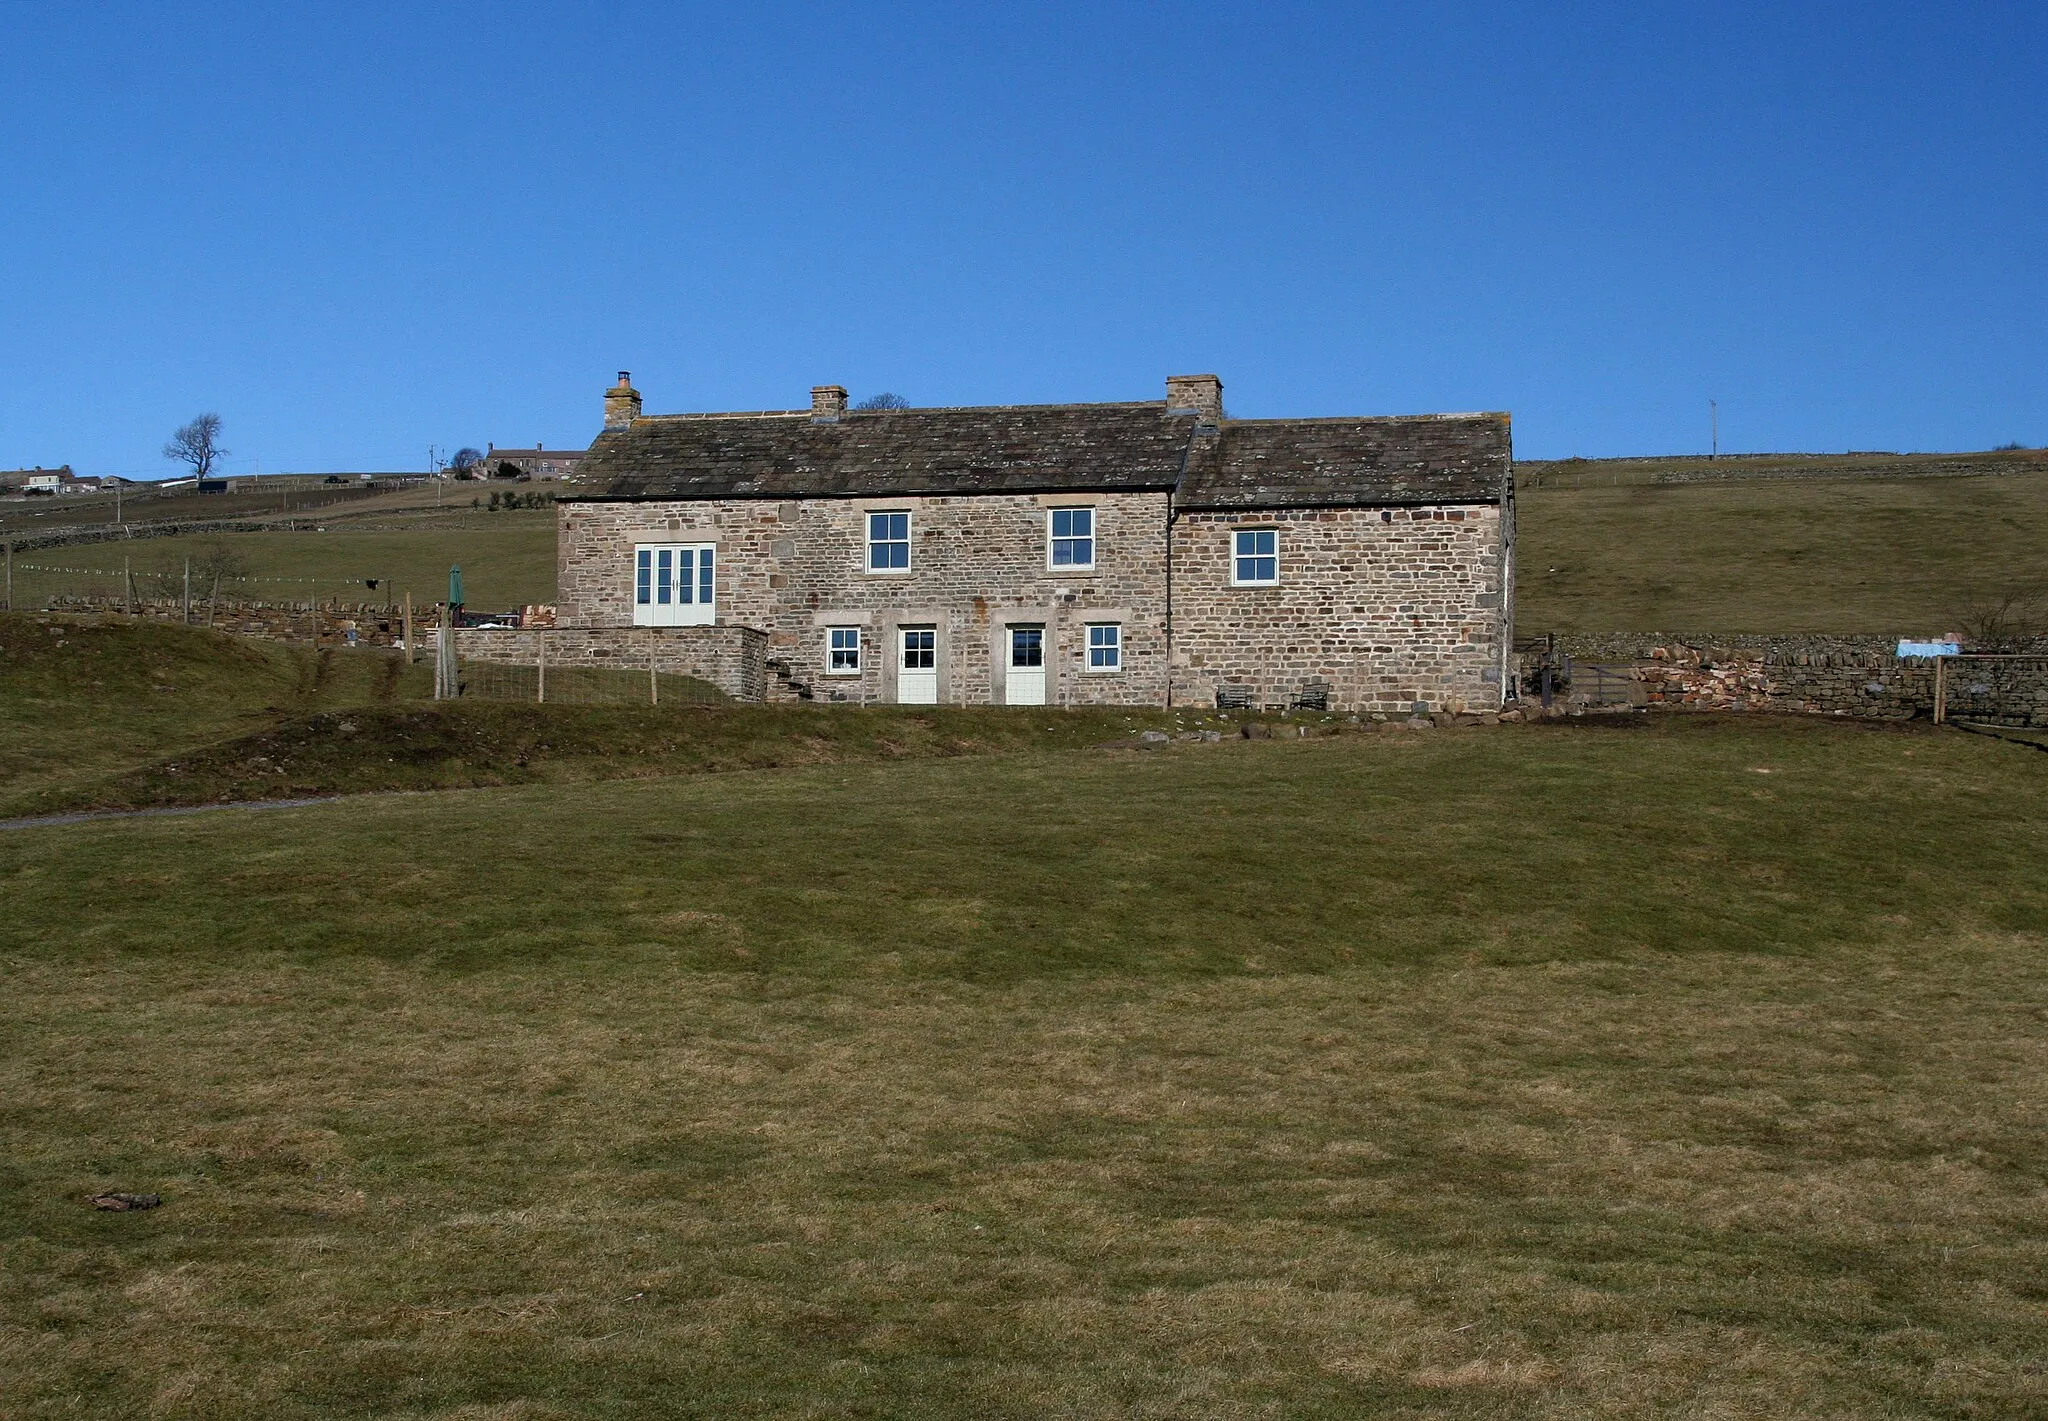 Photo showing: Daddry Shield Cottage near Daddry Shield in Weardale.